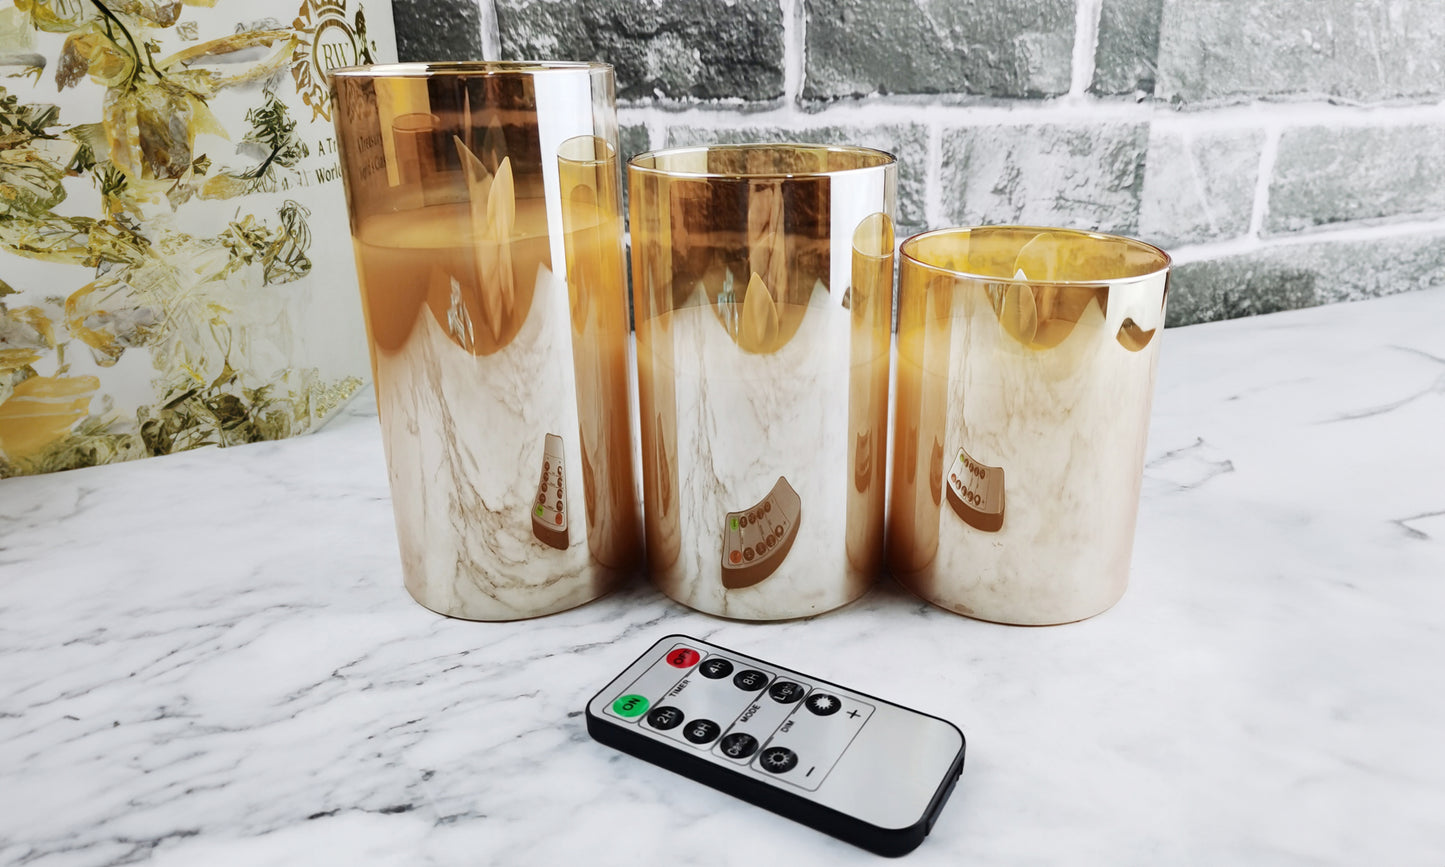 3pcs ShineTek Set of 3 Flameless Flickering LED Candles Electric Pillar Battery Candles Battery Powered Electric Candles with Remote and Timer